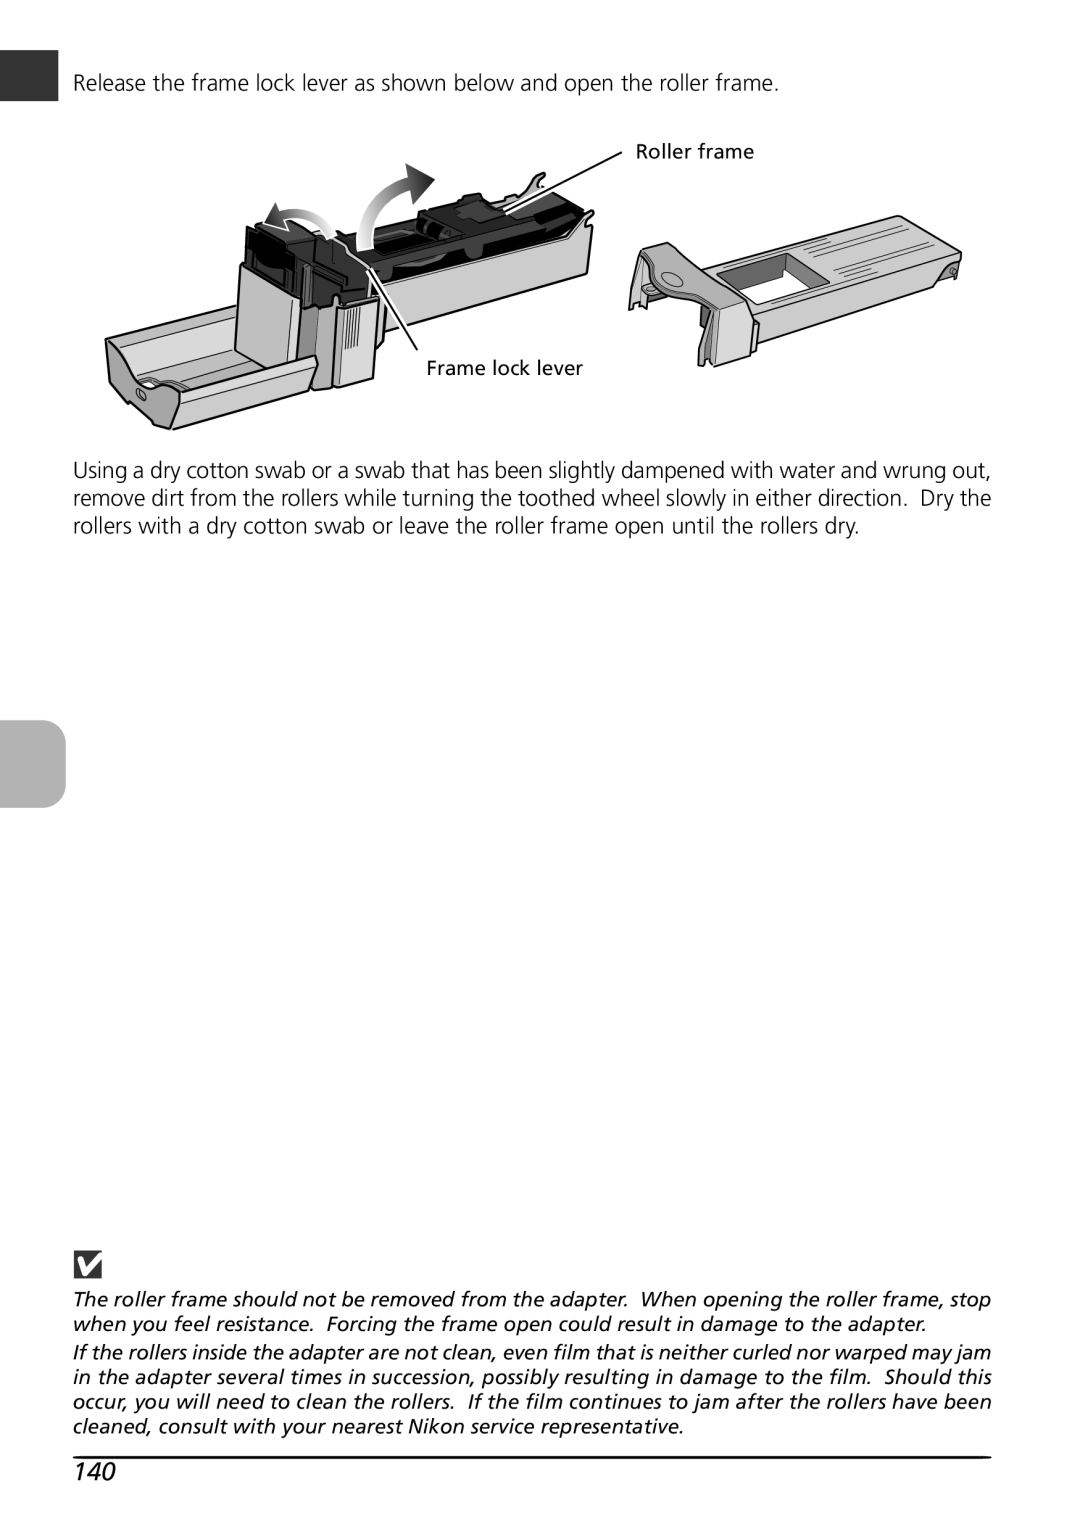 Nikon LS4000 user manual Release the frame lock lever as shown below and open the roller frame 